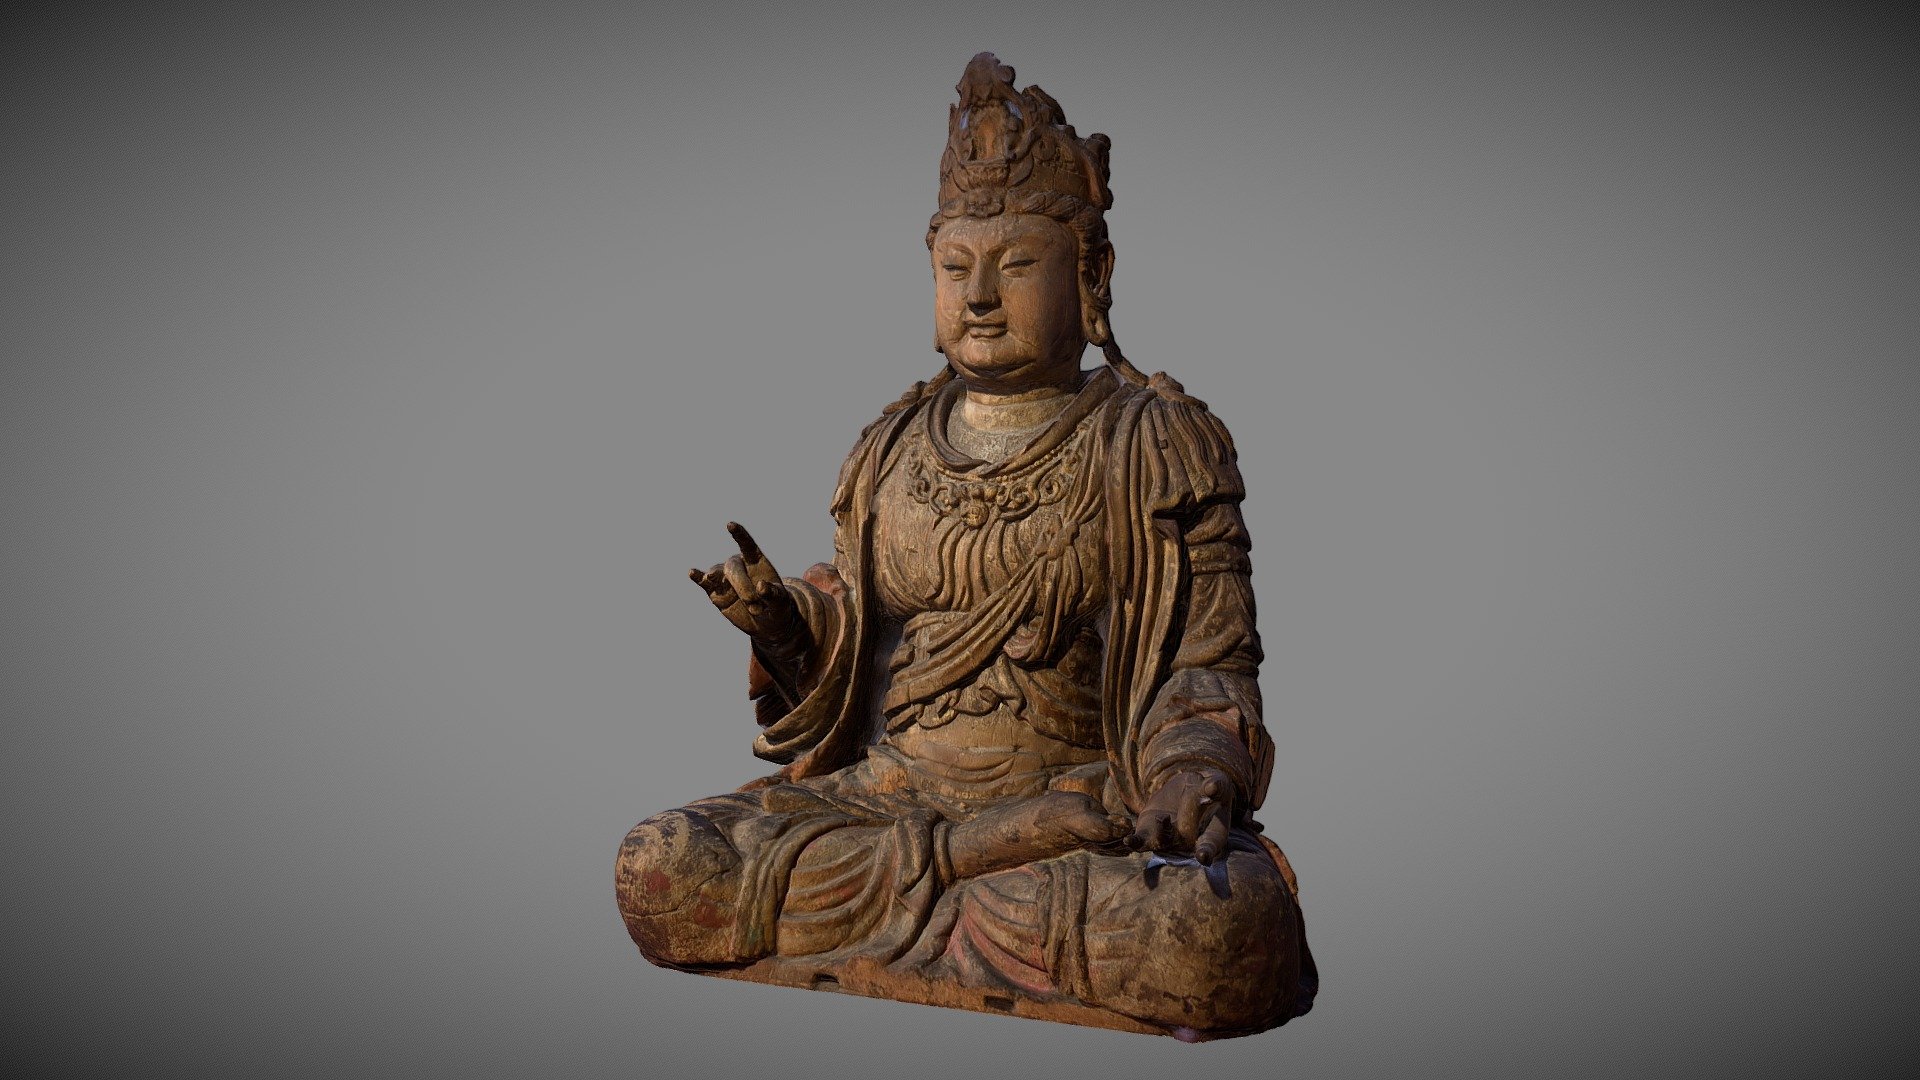 Guanyin (Avalokitesvara), Wood with remains of paint, China, 1200s, National Museum (Copenhagne, Denmark). Made with Memento Beta (now Remake) from Autodesk.

This bodhisattva is the principal savior figure in Mahayana Buddhism. Avalokitesvara (“Lord who looks down”) is a bodhisattva who embodies the compassion of all Buddhas. This bodhisattva is variably depicted and described and is portrayed in different cultures as either female or male. In Chinese Buddhism, Avalokitesvara has become the somewhat different female figure Guanyin. In Cambodia, he appears as Lokesvara. (Wikipedia)

For more updates, please follow @GeoffreyMarchal on Twitter 3d model